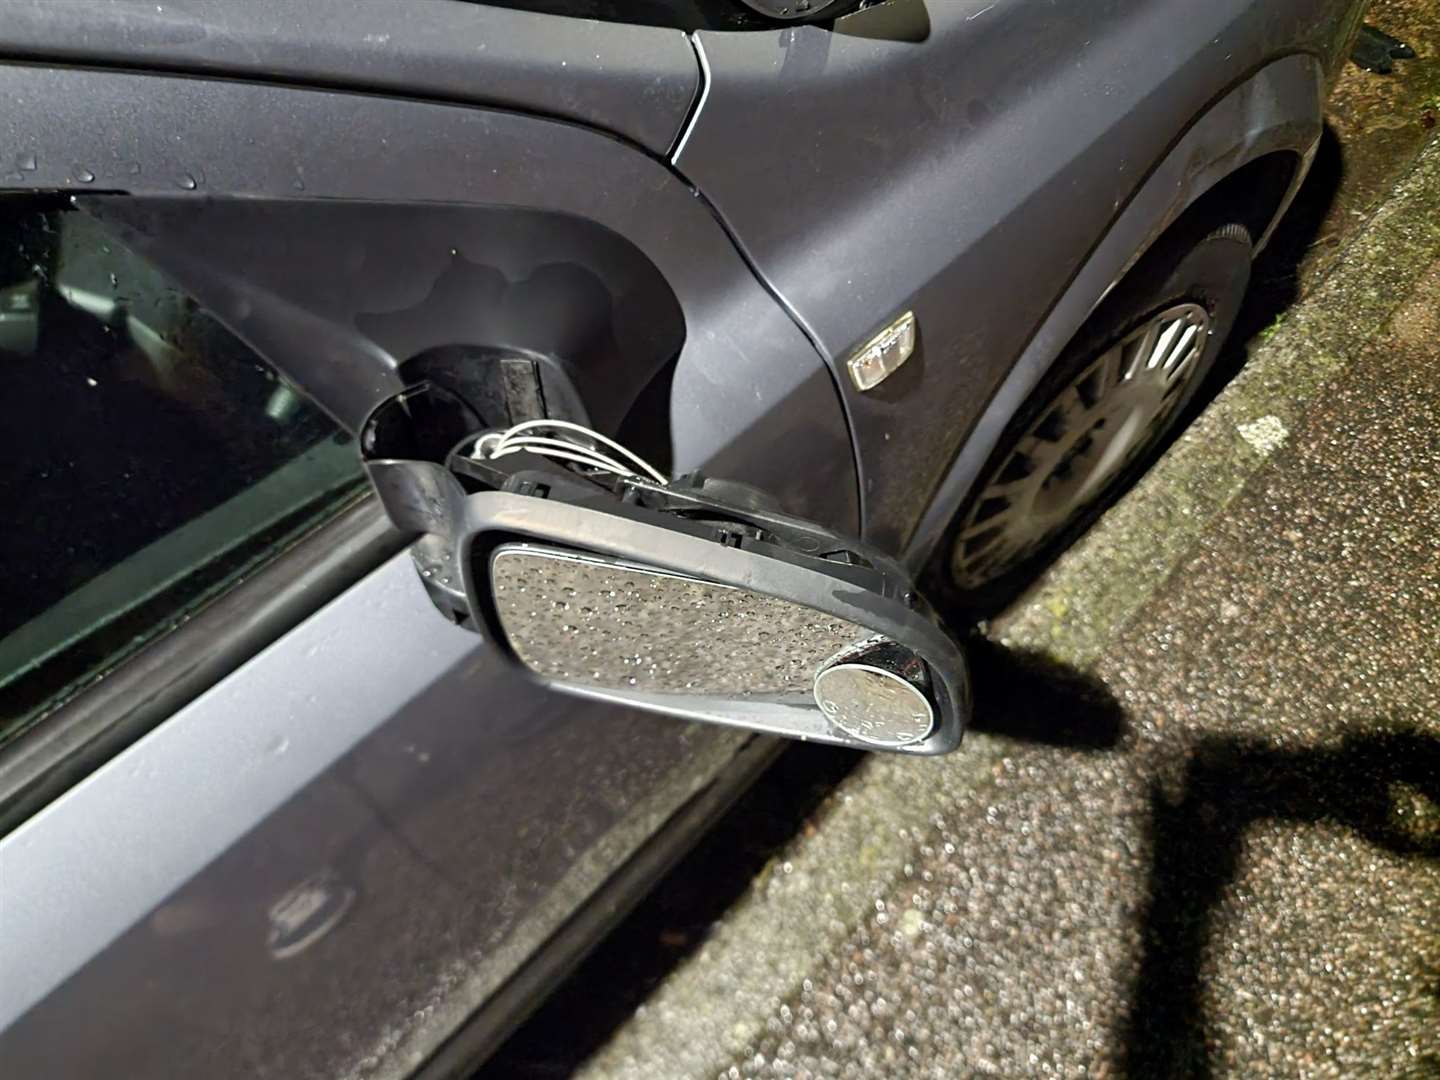 Damage caused to a car in Riverview Park on Halloween